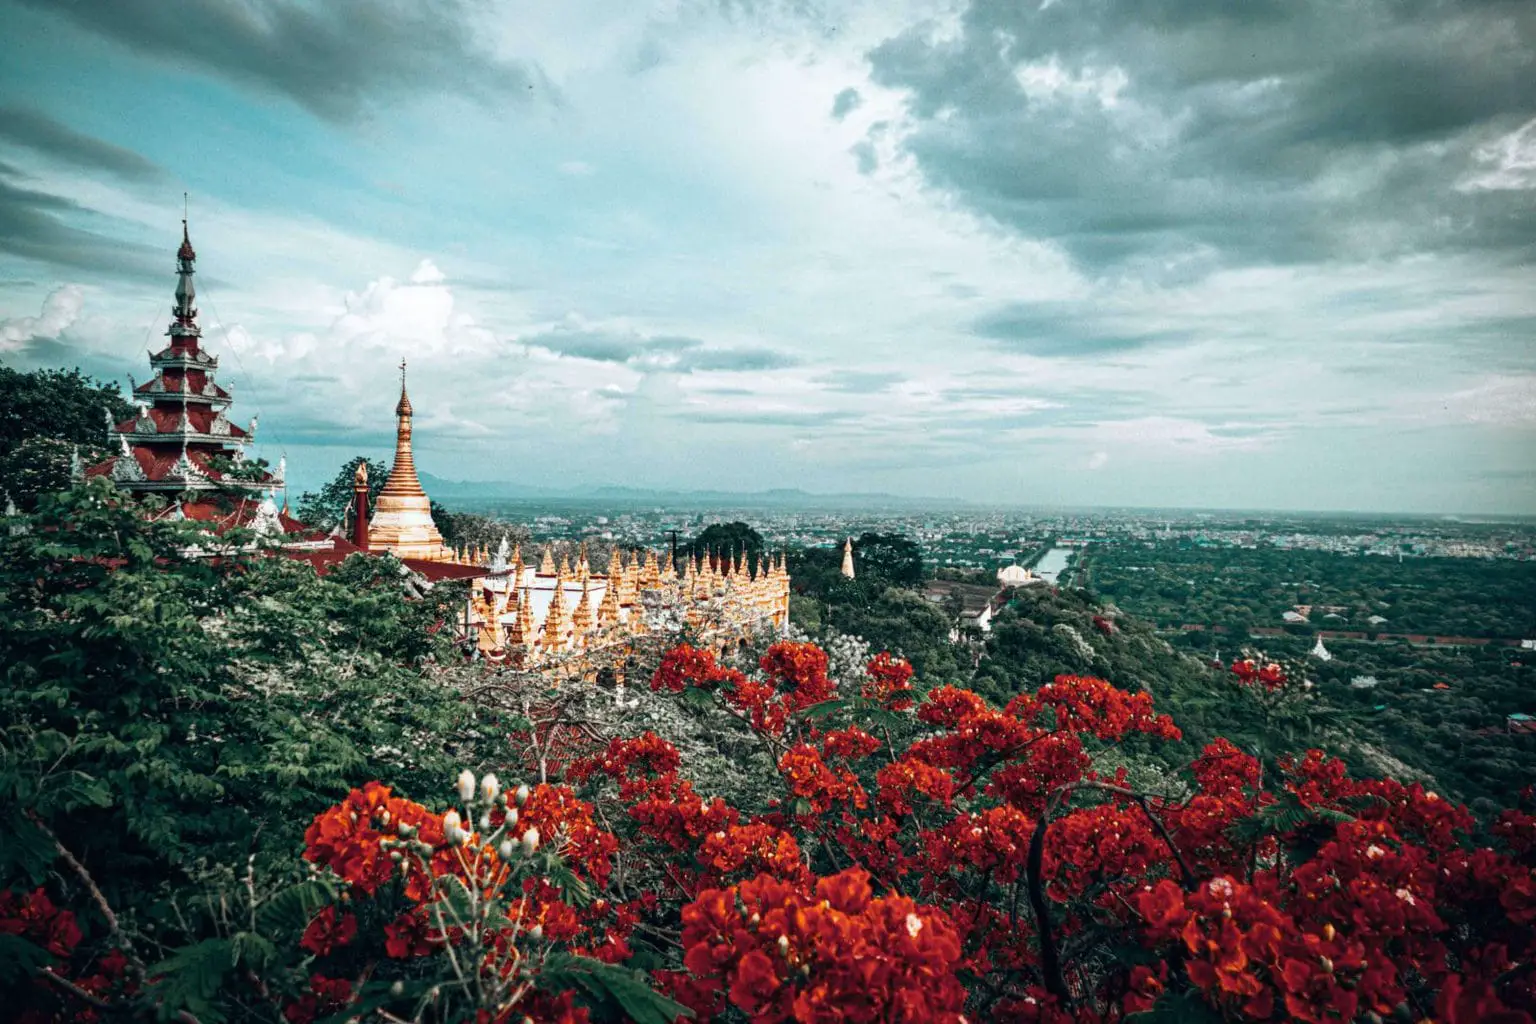 Picture of flowers and the view at Mandalay Hill in Mandalay, Myanmar